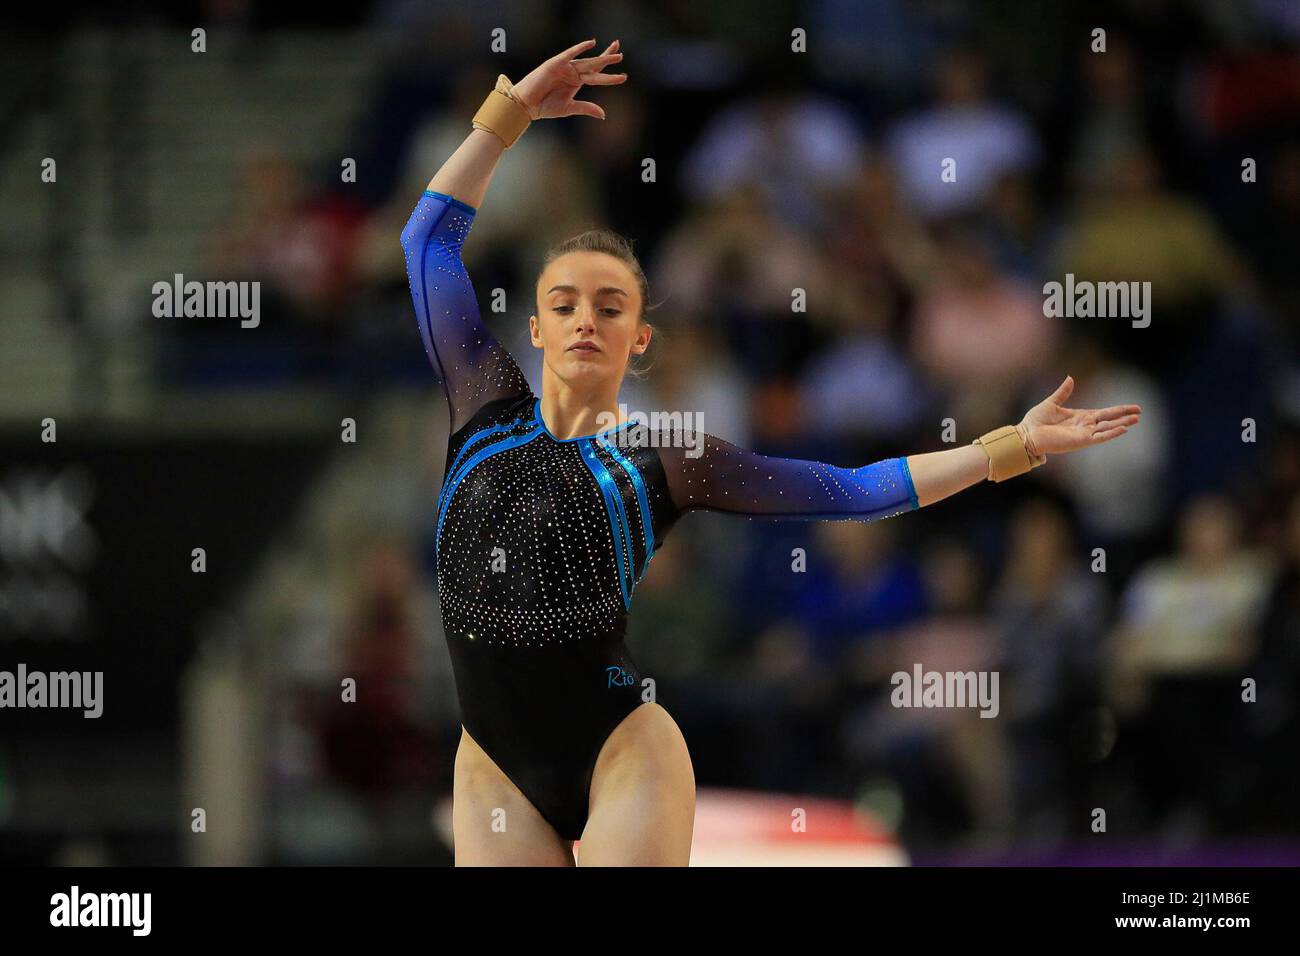 Liverpool, UK. 26th Mar, 2022. Shannon Archer of South Essex Gymnastics Club performs her floor routine in Liverpool, United Kingdom on 3/26/2022. (Photo by Conor Molloy/News Images/Sipa USA) Credit: Sipa USA/Alamy Live News Stock Photo